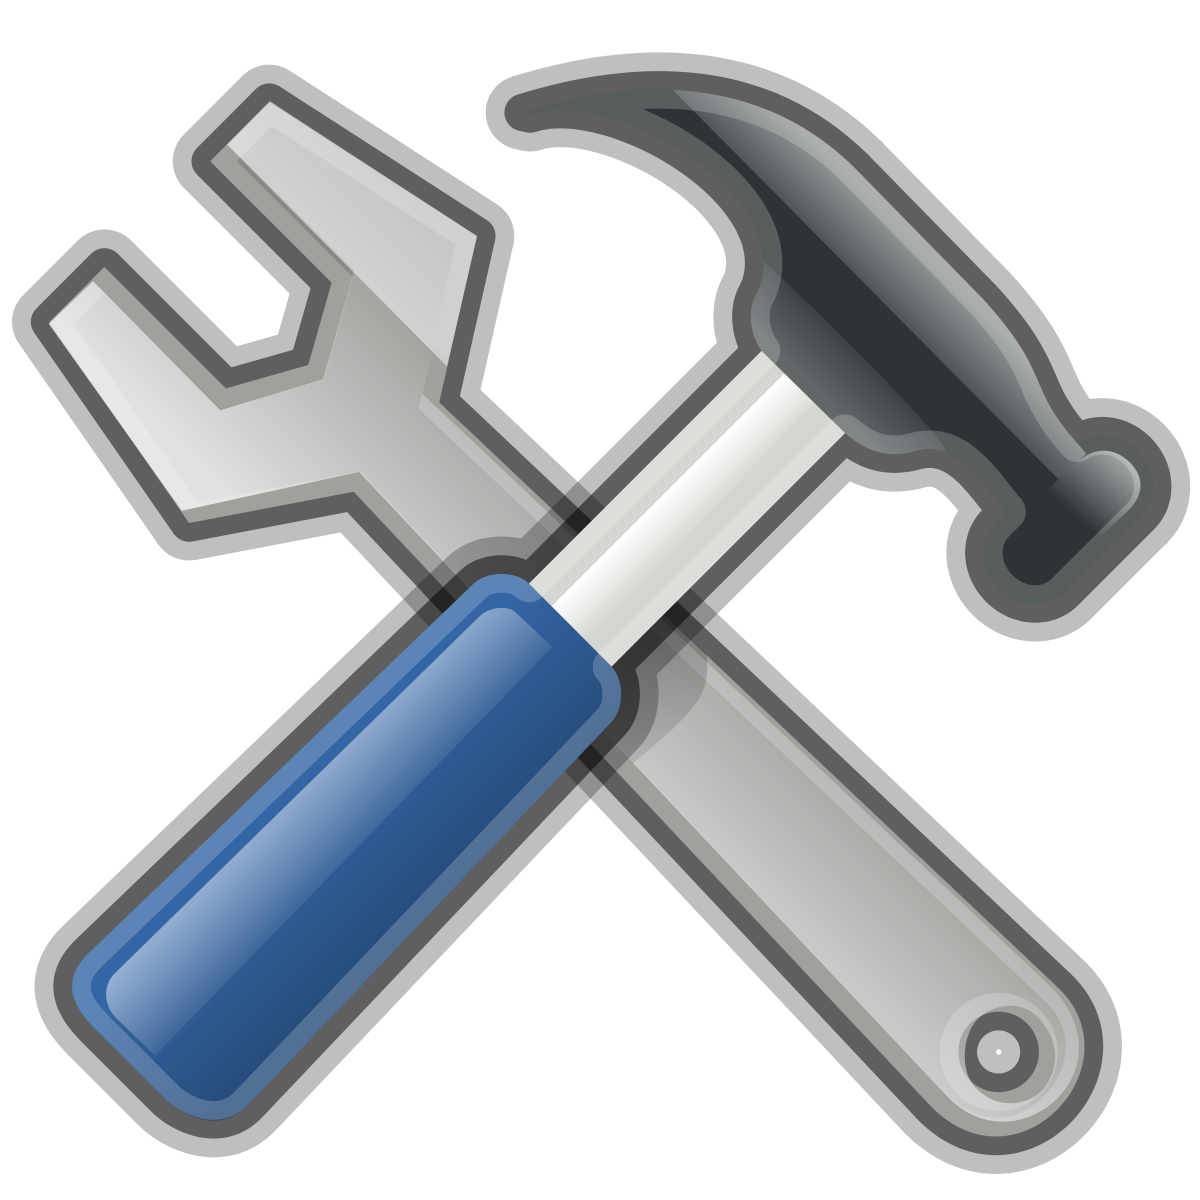 File:Tools.svg - Wikimedia Commons